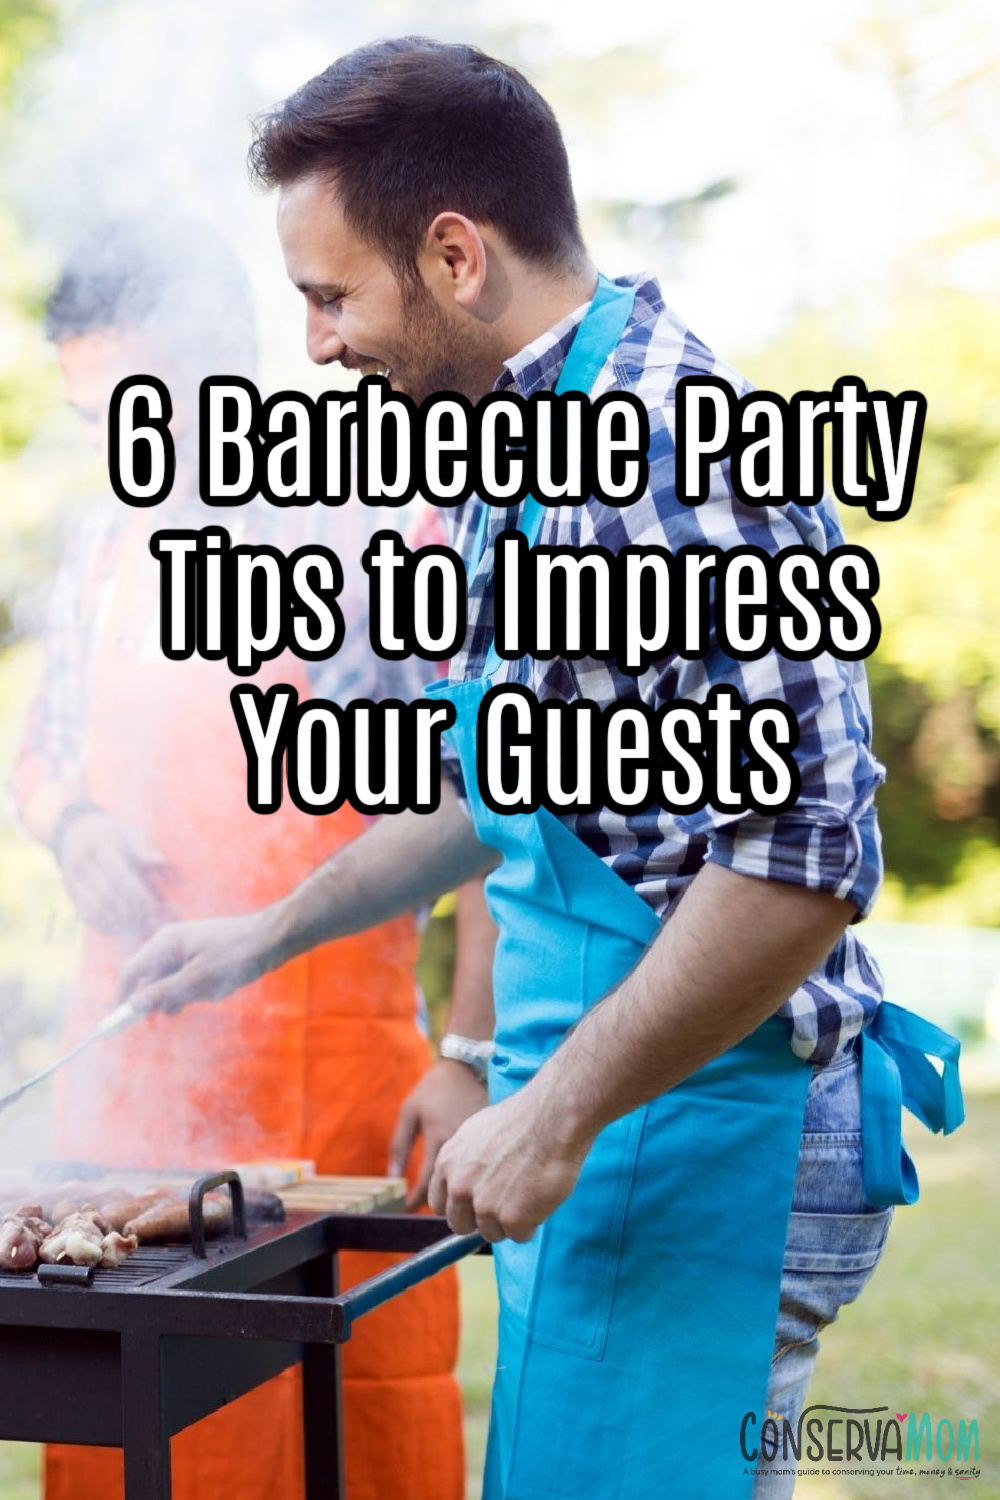 6 Barbecue Party Tips to Impress Your Guests